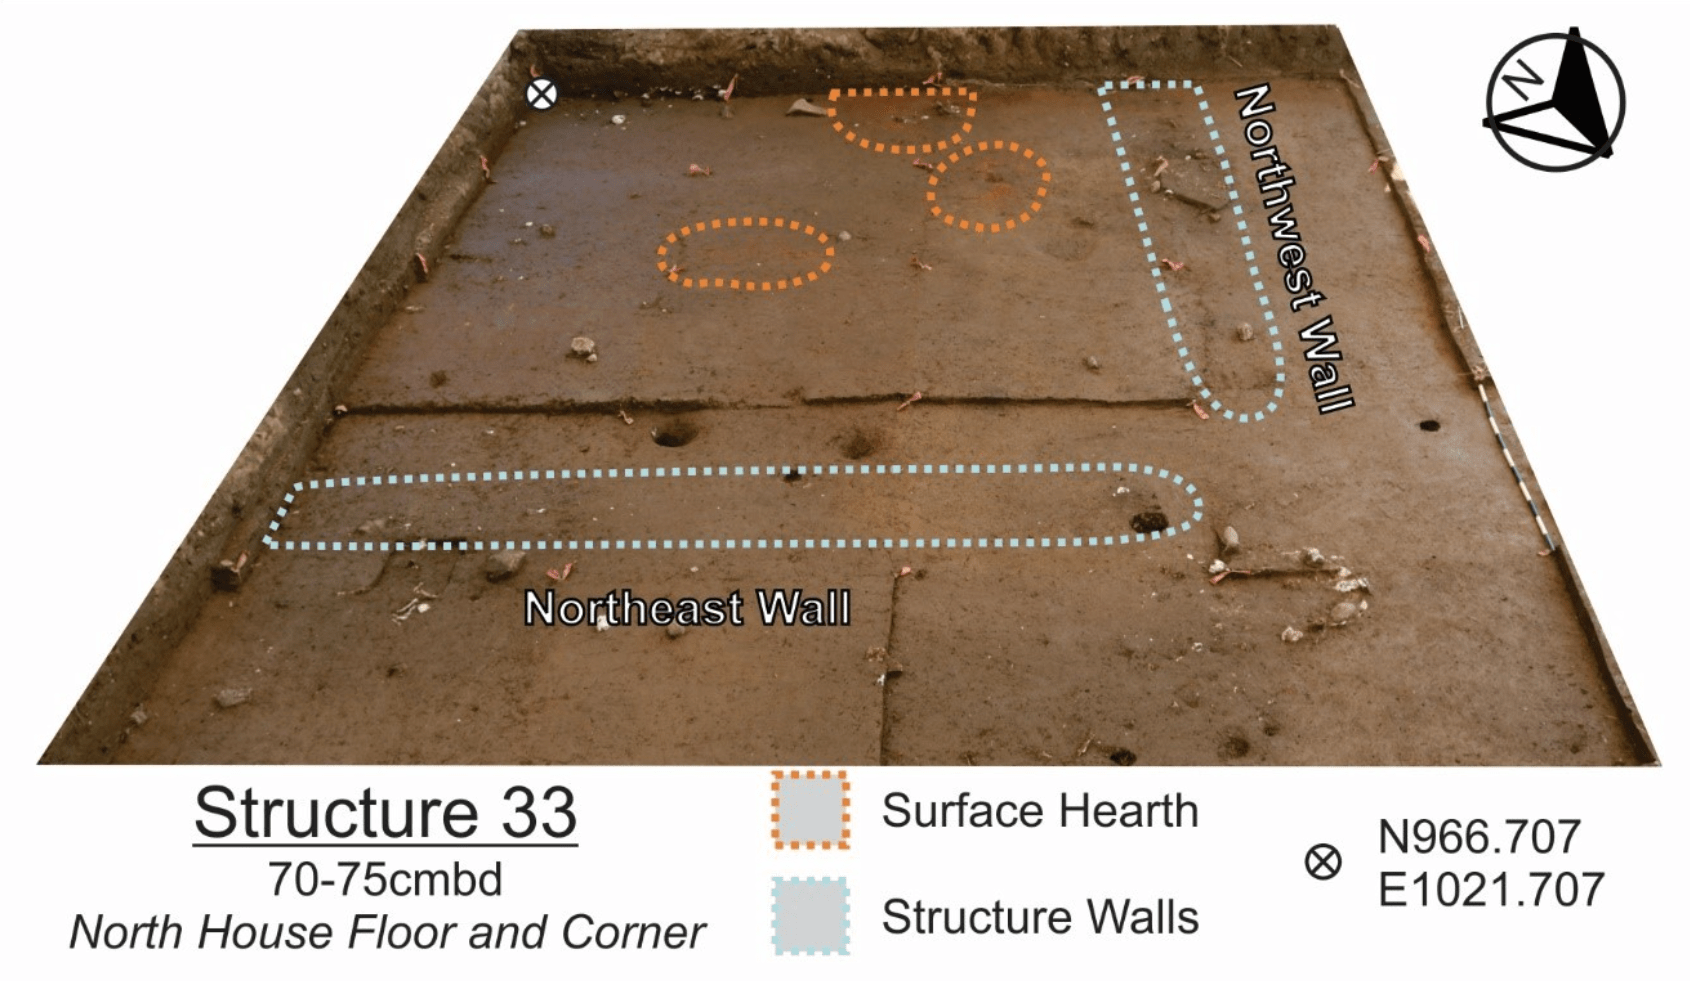 Use the outlines to help interpret the 2020 Excavations, can you see the house walls and activity areas inside the house?